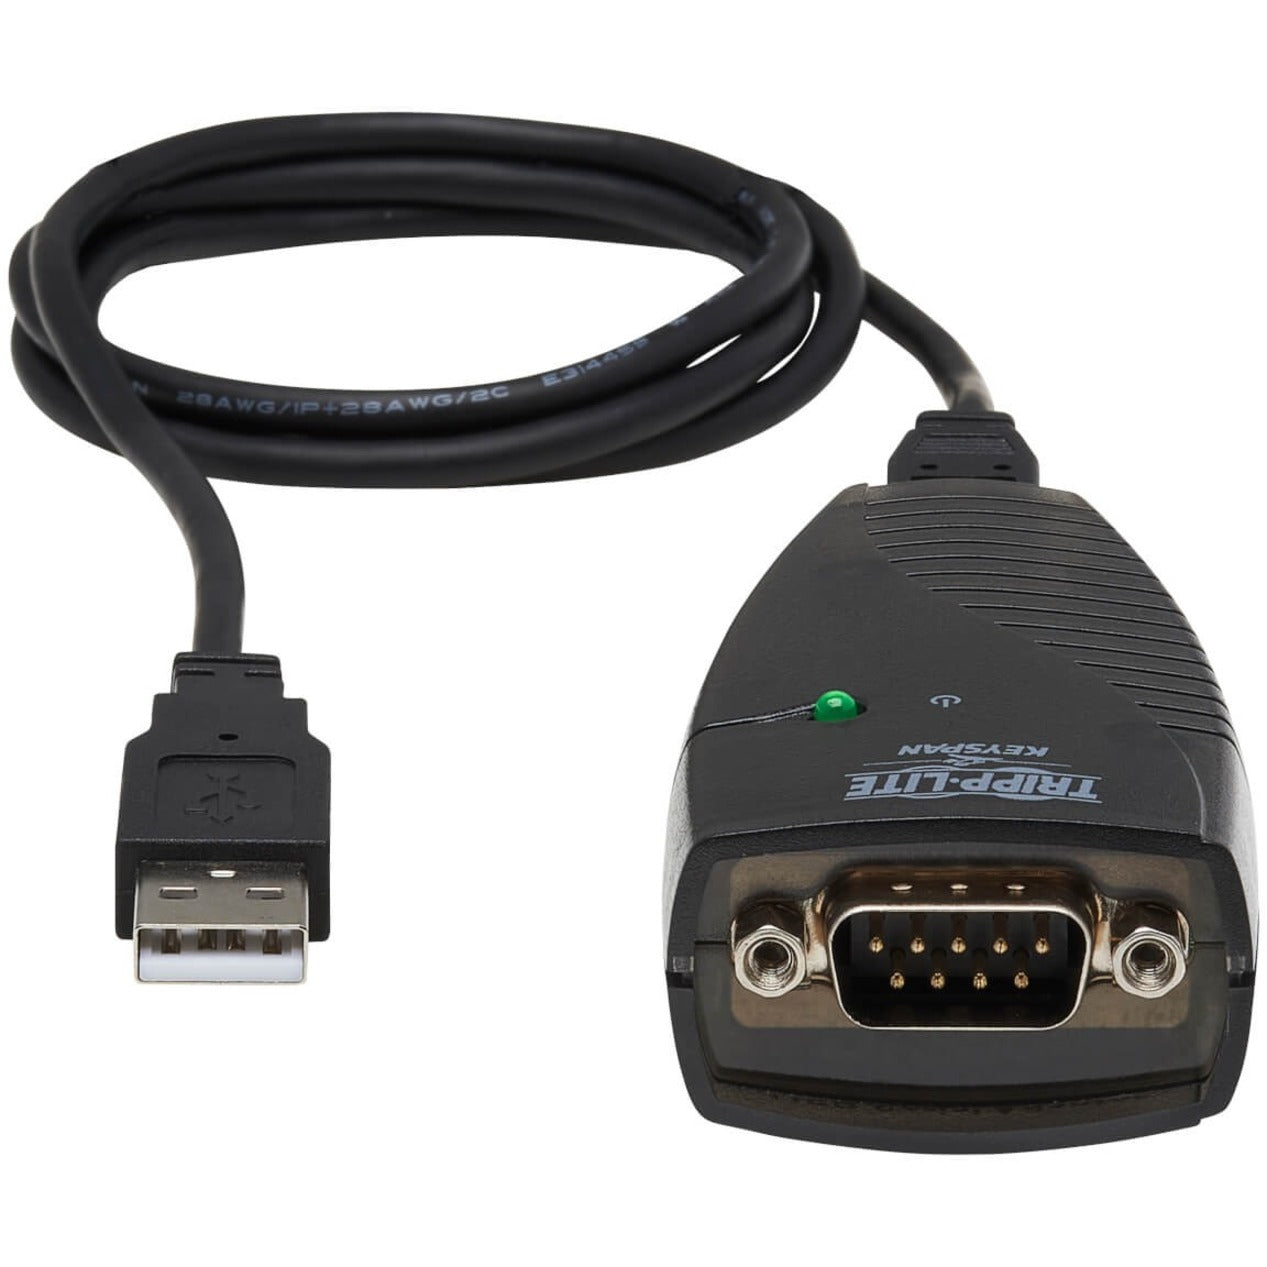 Keyspan USA-19HS High Speed USB Serial Adapter, Data Transfer Cable, 3 ft, Copper Conductor, TAA Compliant, RoHS Certified